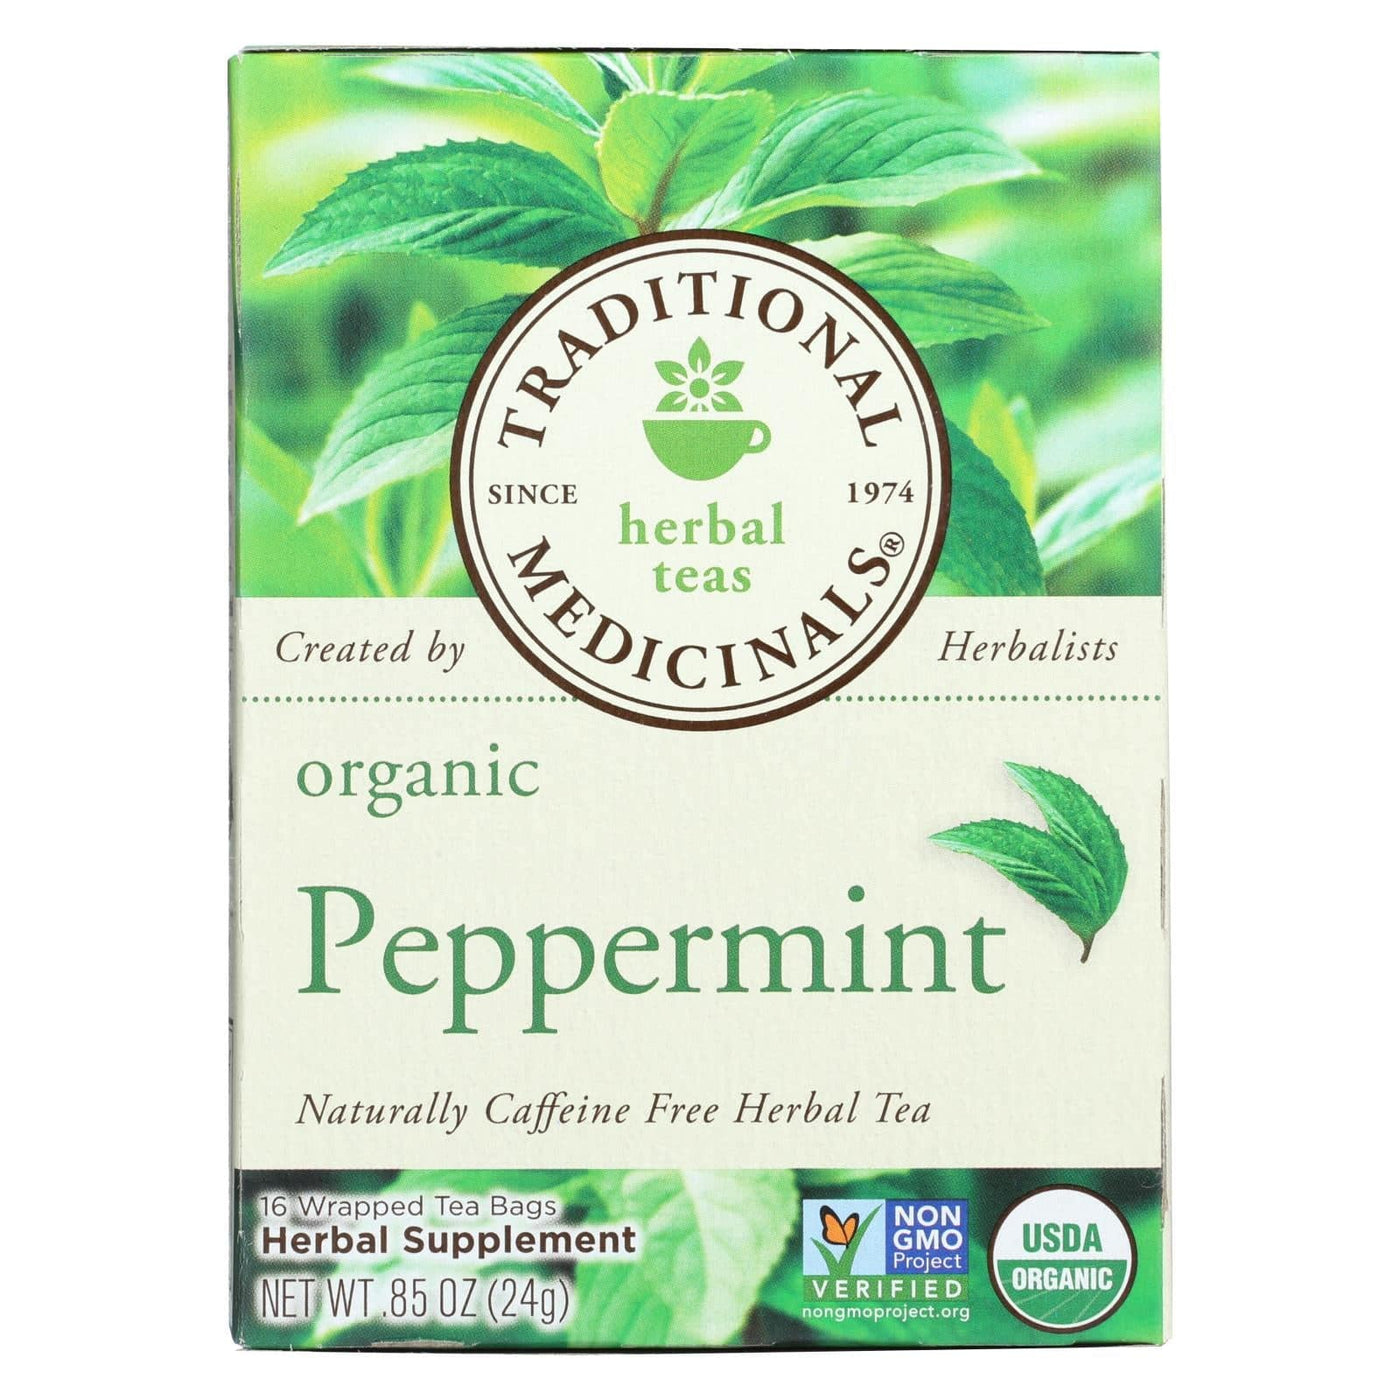 Traditional Medicinals Organic Peppermint Herbal Tea - Caffeine Free - Case Of 6 - 16 Bags | OnlyNaturals.us